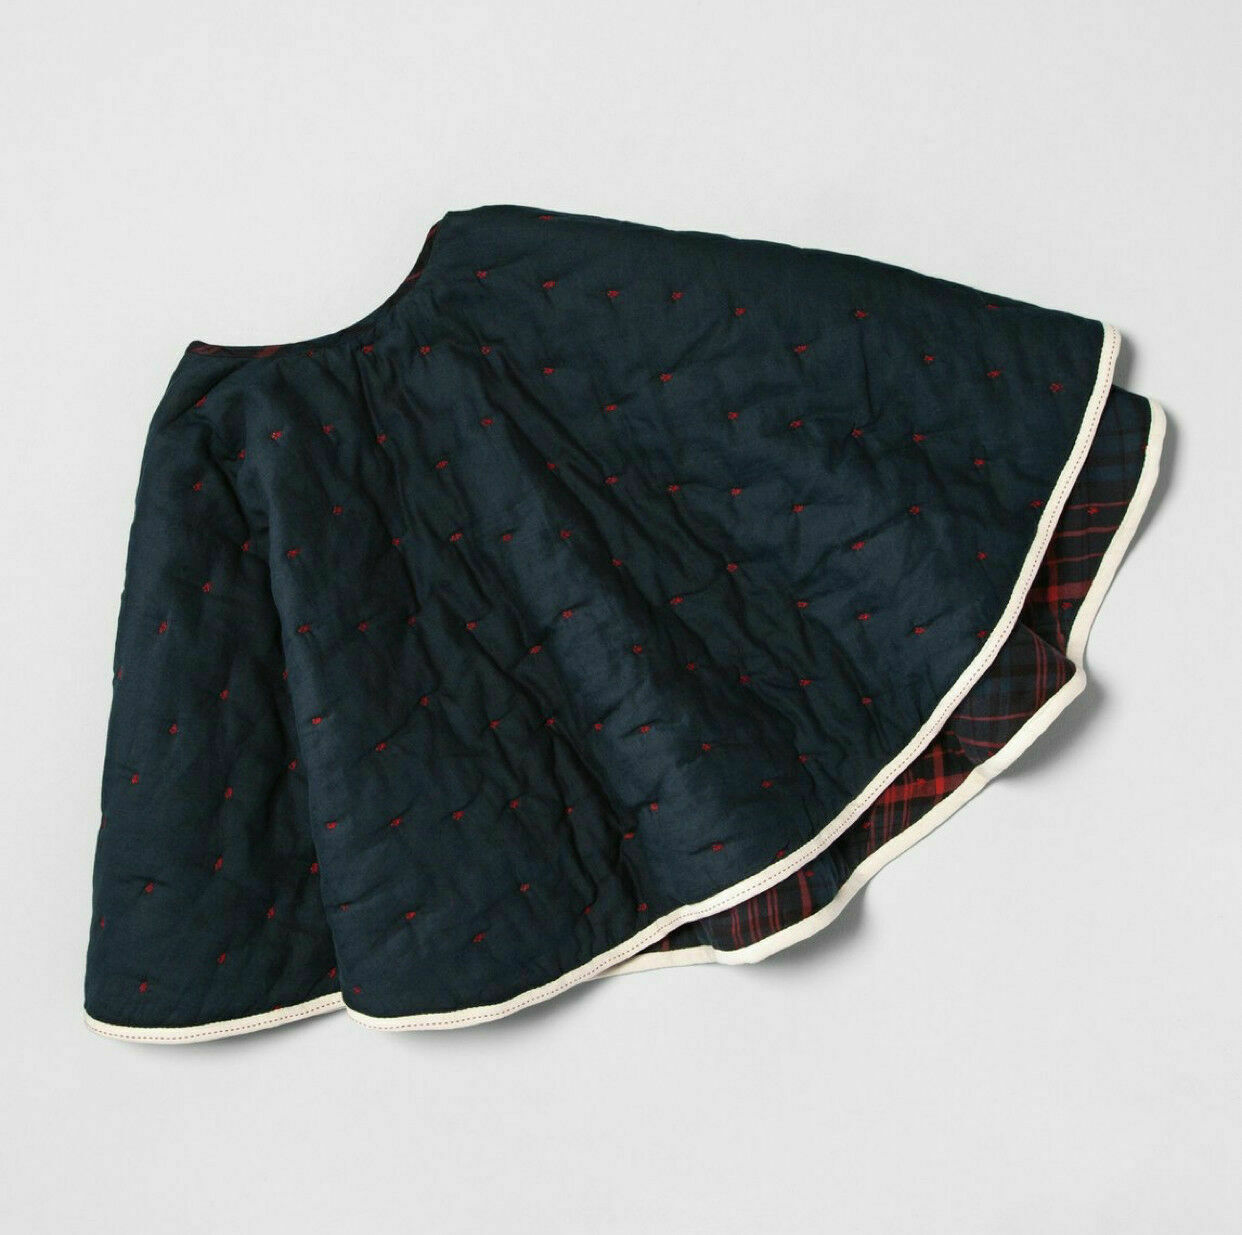 New Hearth And Hand With Magnolia Reversible Plaid Embroidered Tree Skirt